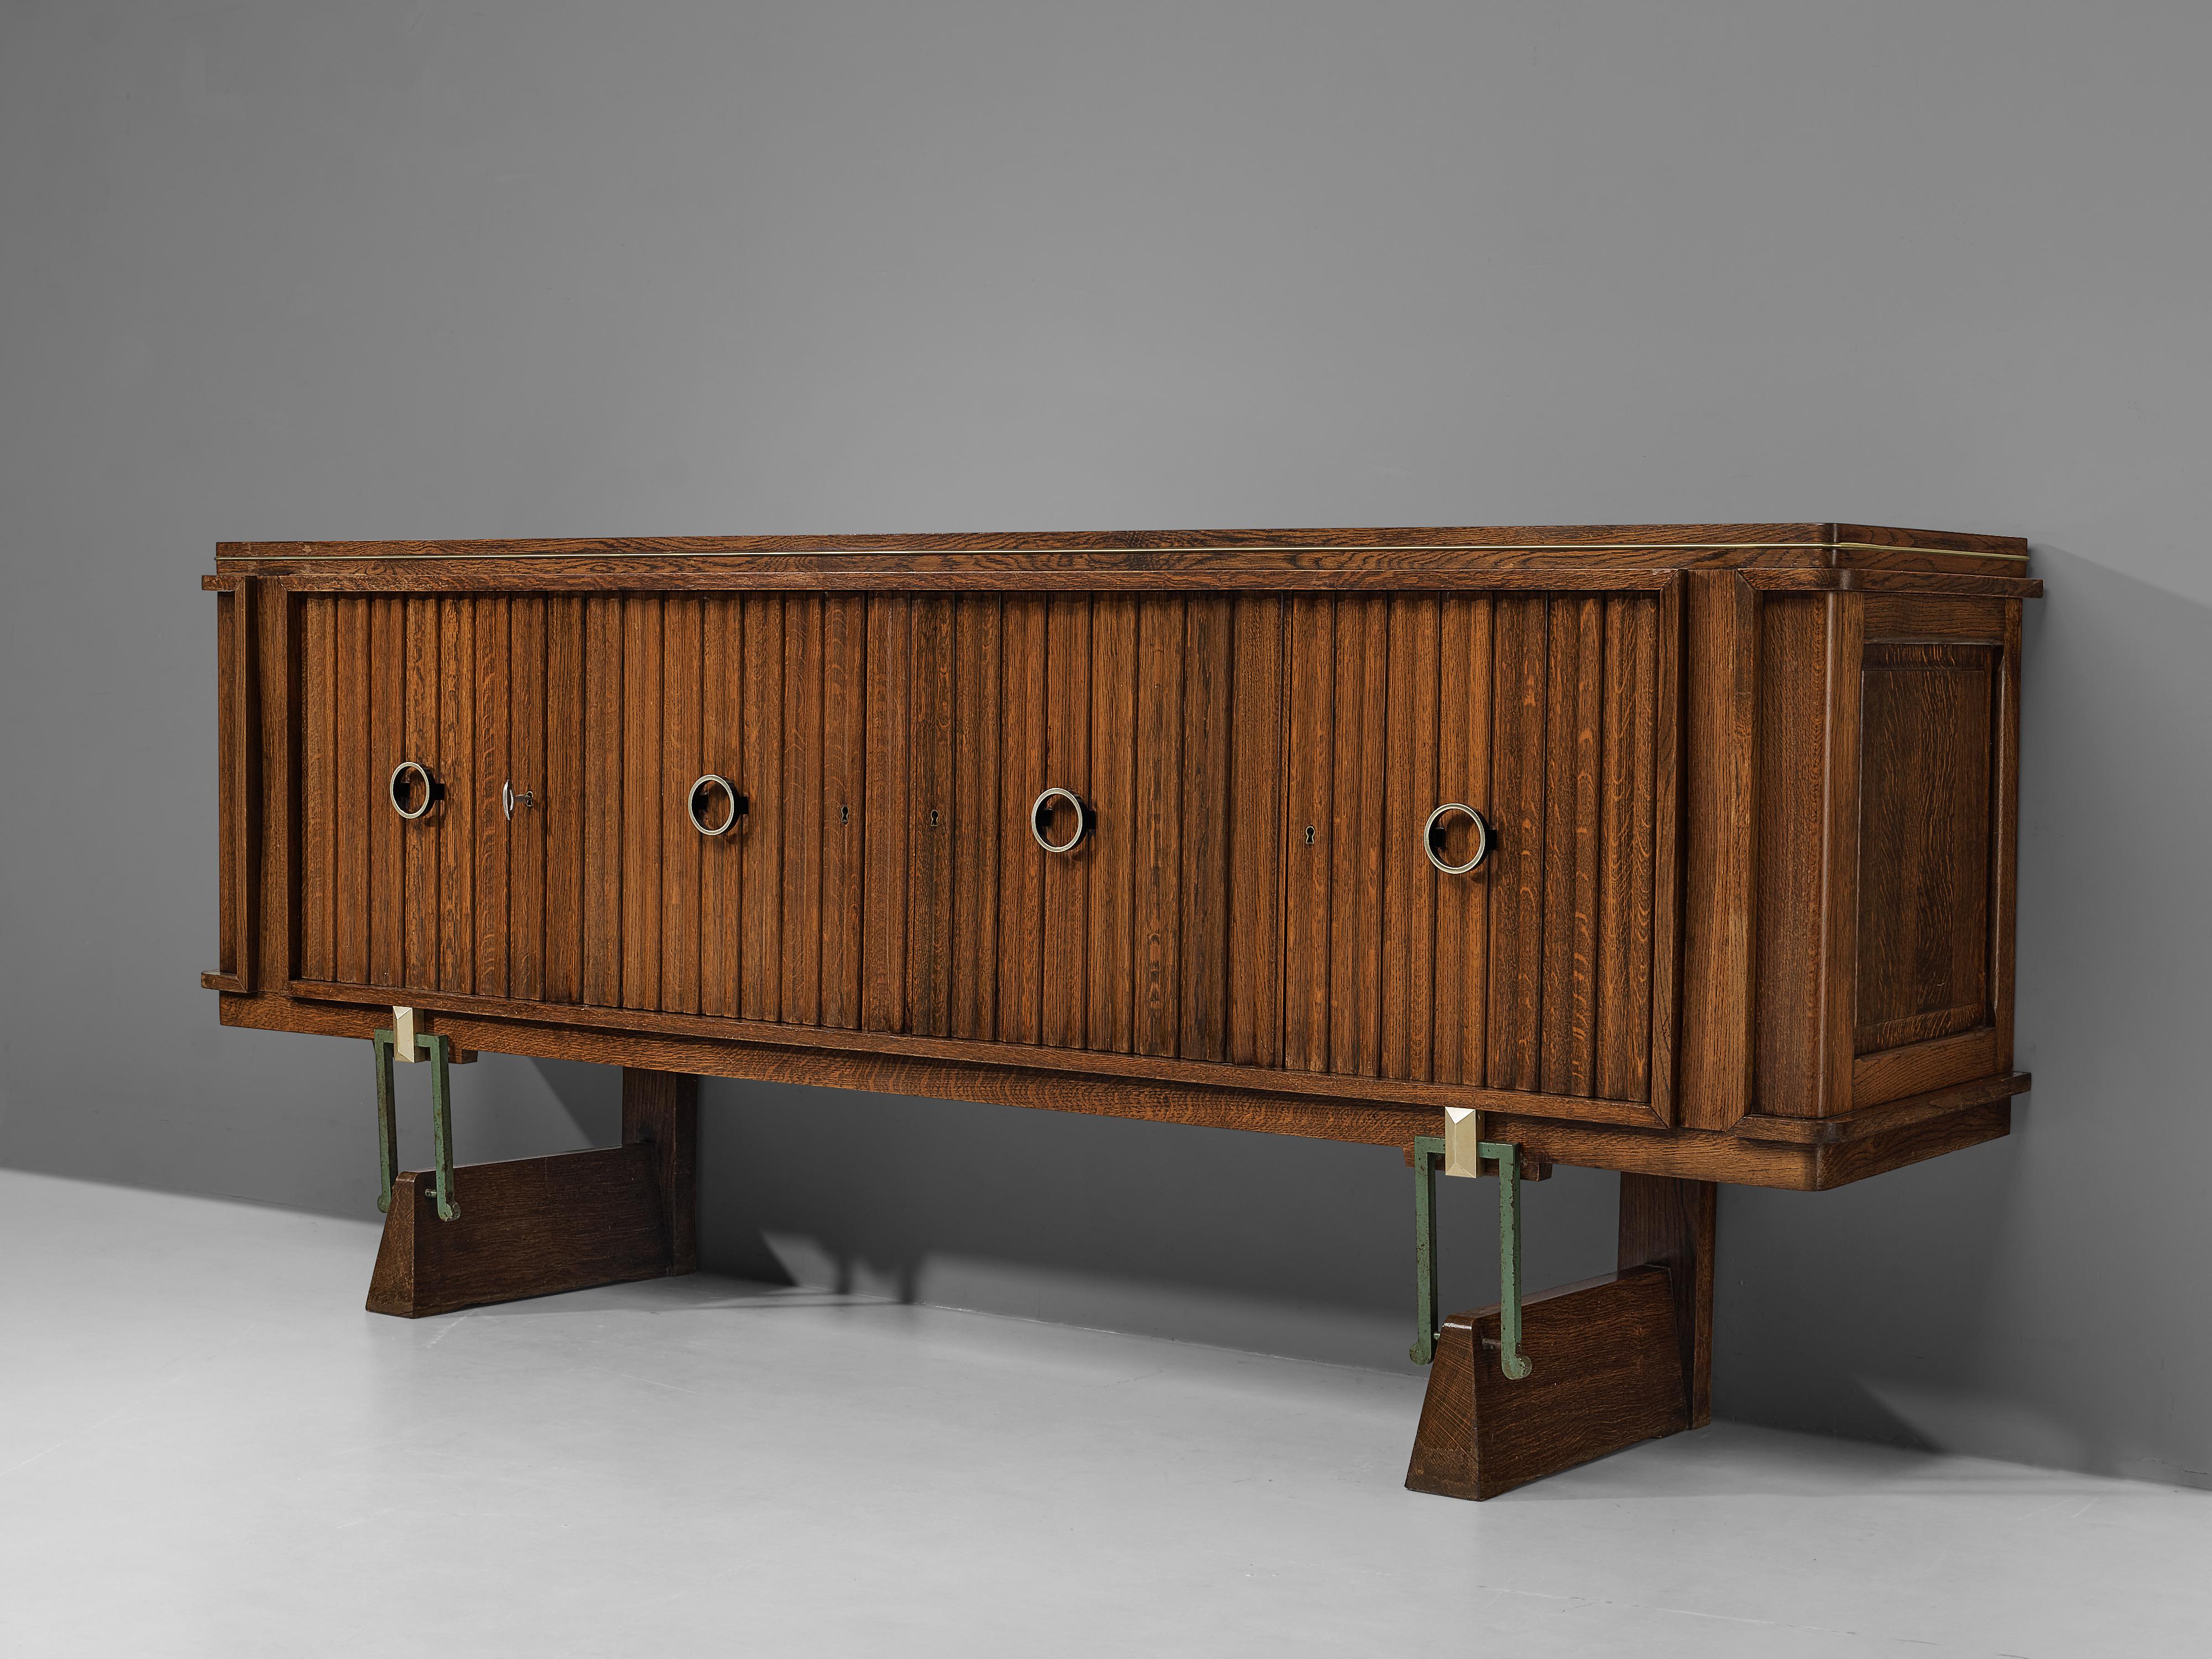 Sideboard, oak, brass, metal, France, 1940s

This lovely elongated sideboard features four door panels with vertical wood carvings, accompanied with circular brass handles. A beautiful detail that makes it such a well-designed piece, are the